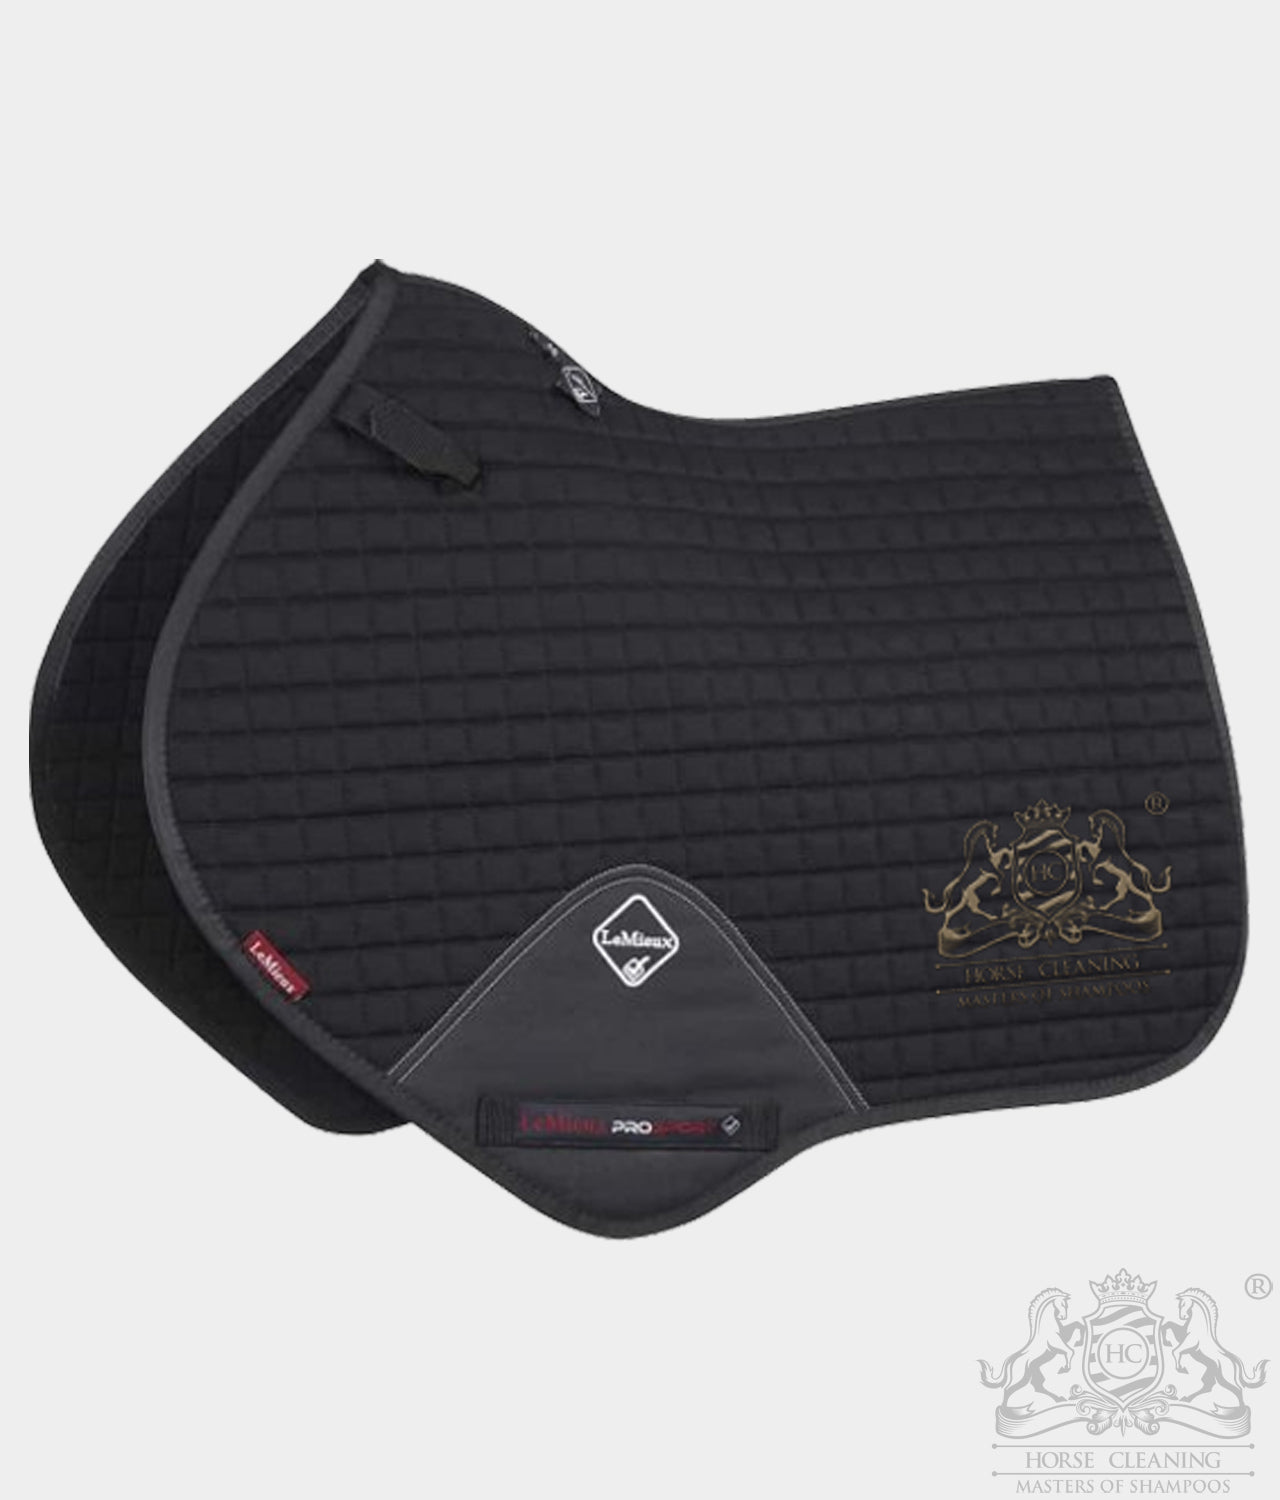 Horse Cleaning ProSport Black Close Contact Saddle Pad - Horse Cleaning Masters Of Shampoos ™